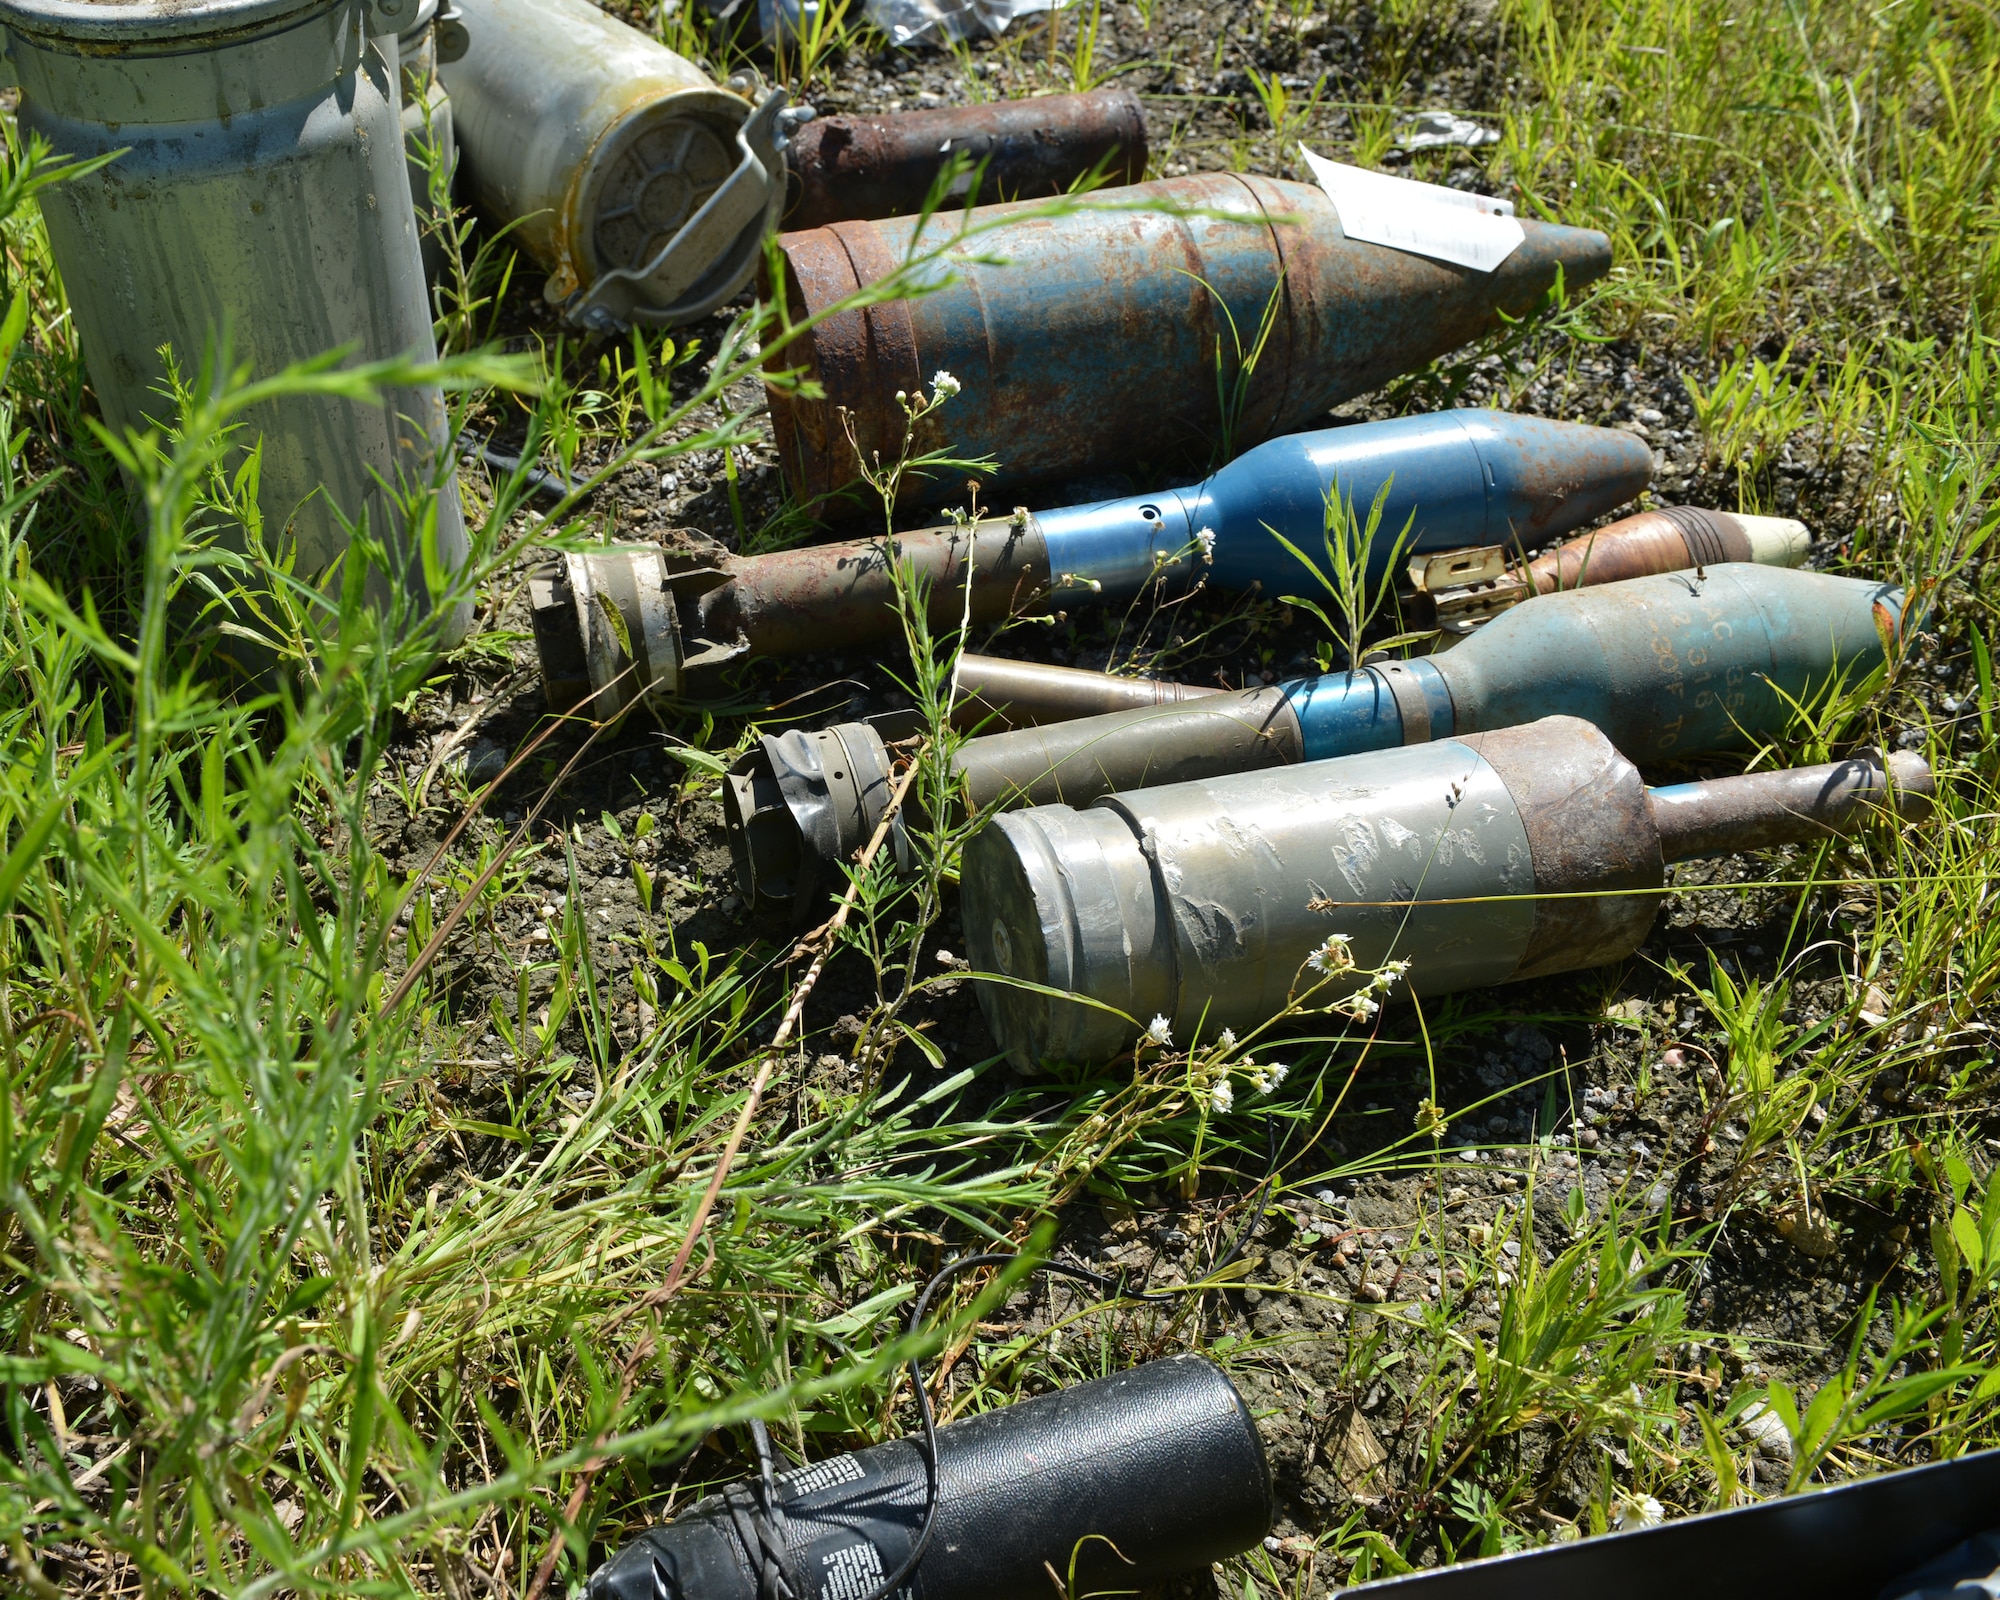 The 155th Explosive Ordnance Disposal shop traveled to Weeping Water, Neb., to dispose of and detonate military munitions gathered from law enforcement agencies around the state of Nebraska, July 17.